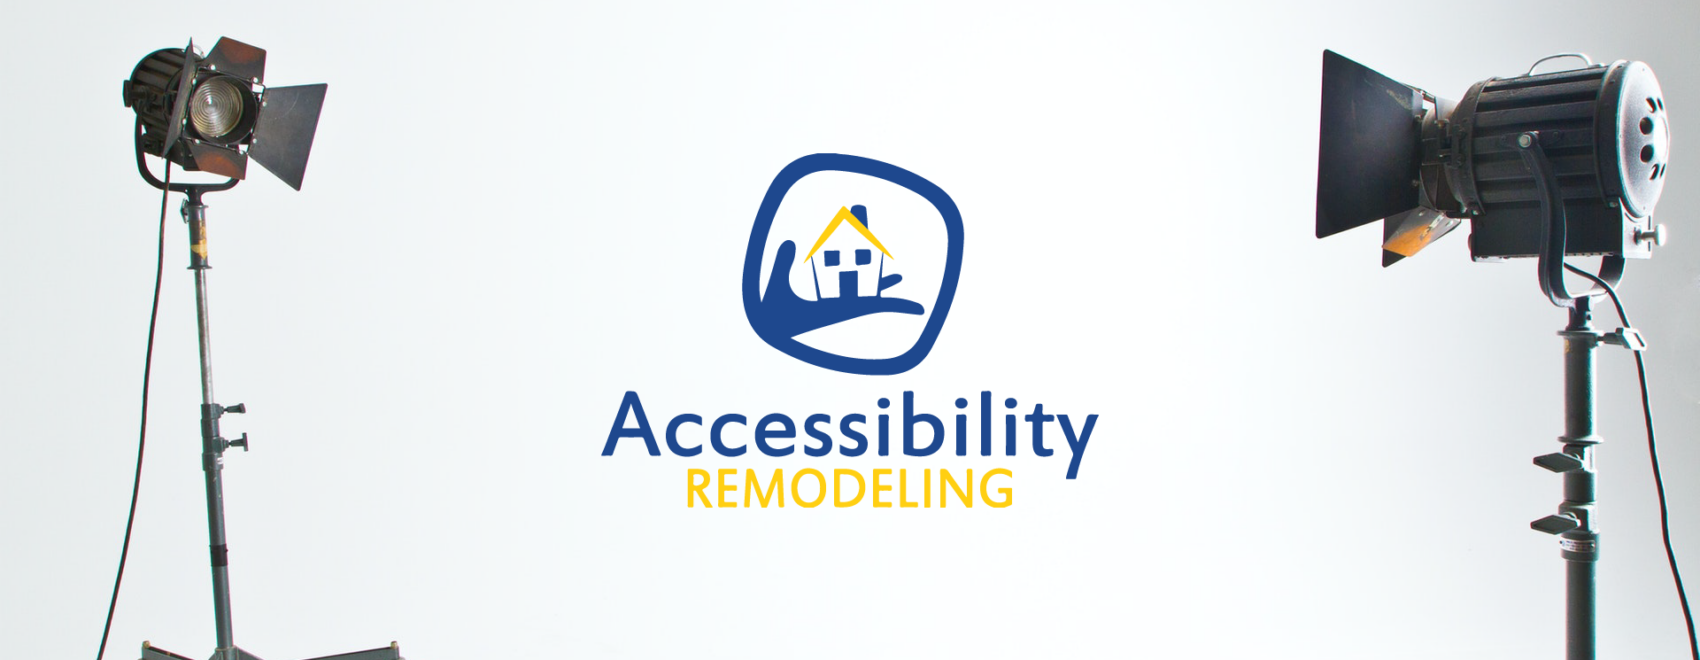 Two spotlights focused on the Accessibility Remodeling logo